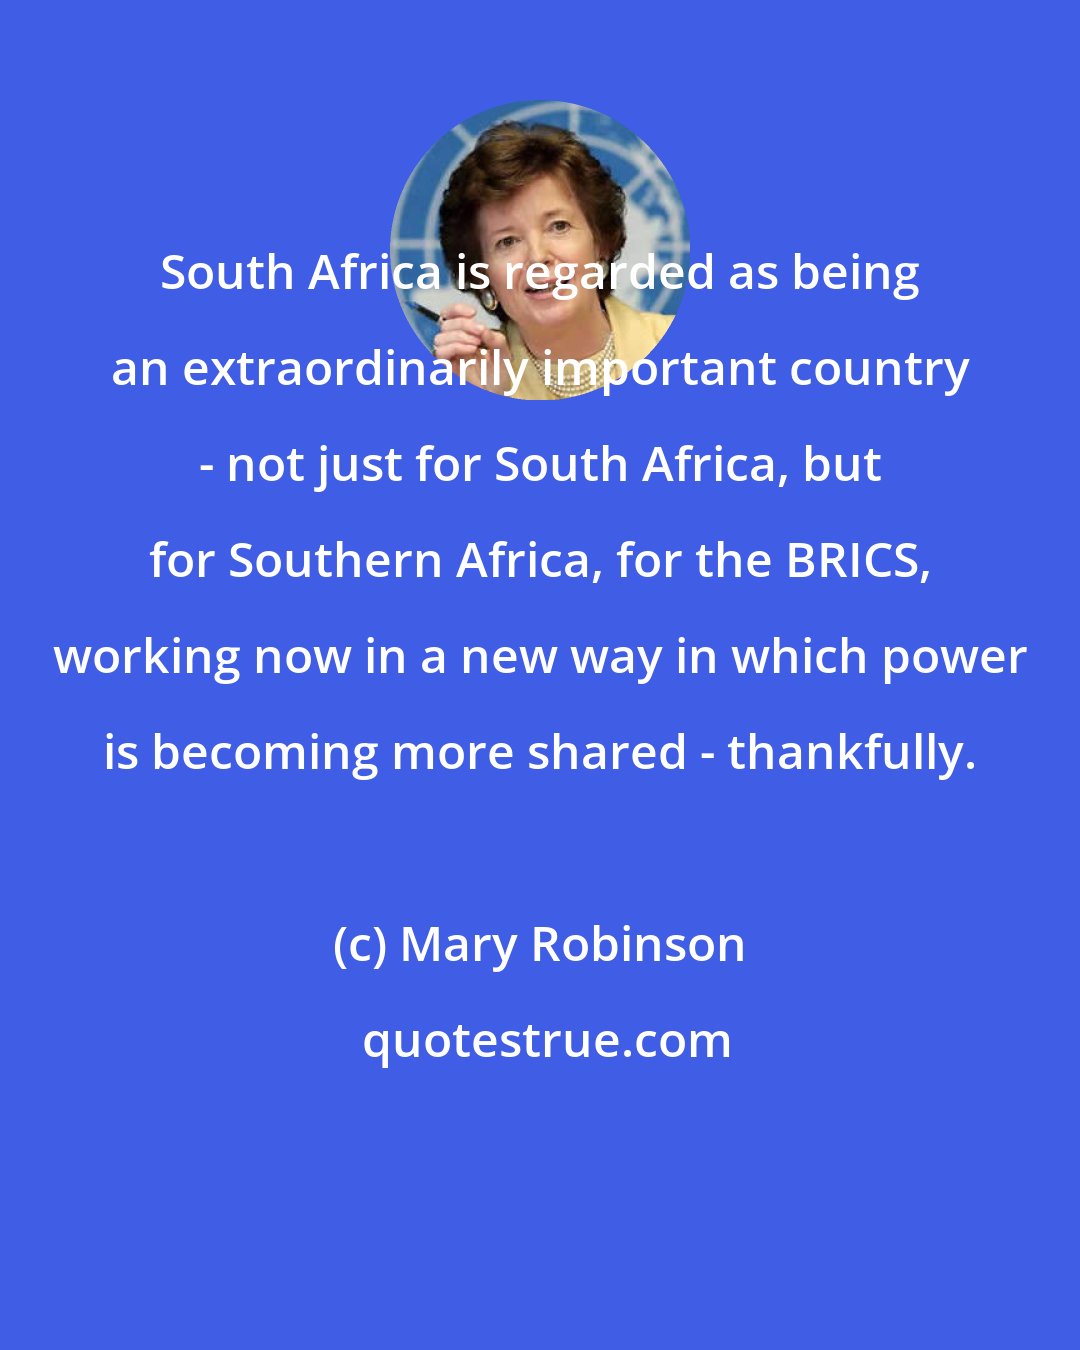 Mary Robinson: South Africa is regarded as being an extraordinarily important country - not just for South Africa, but for Southern Africa, for the BRICS, working now in a new way in which power is becoming more shared - thankfully.